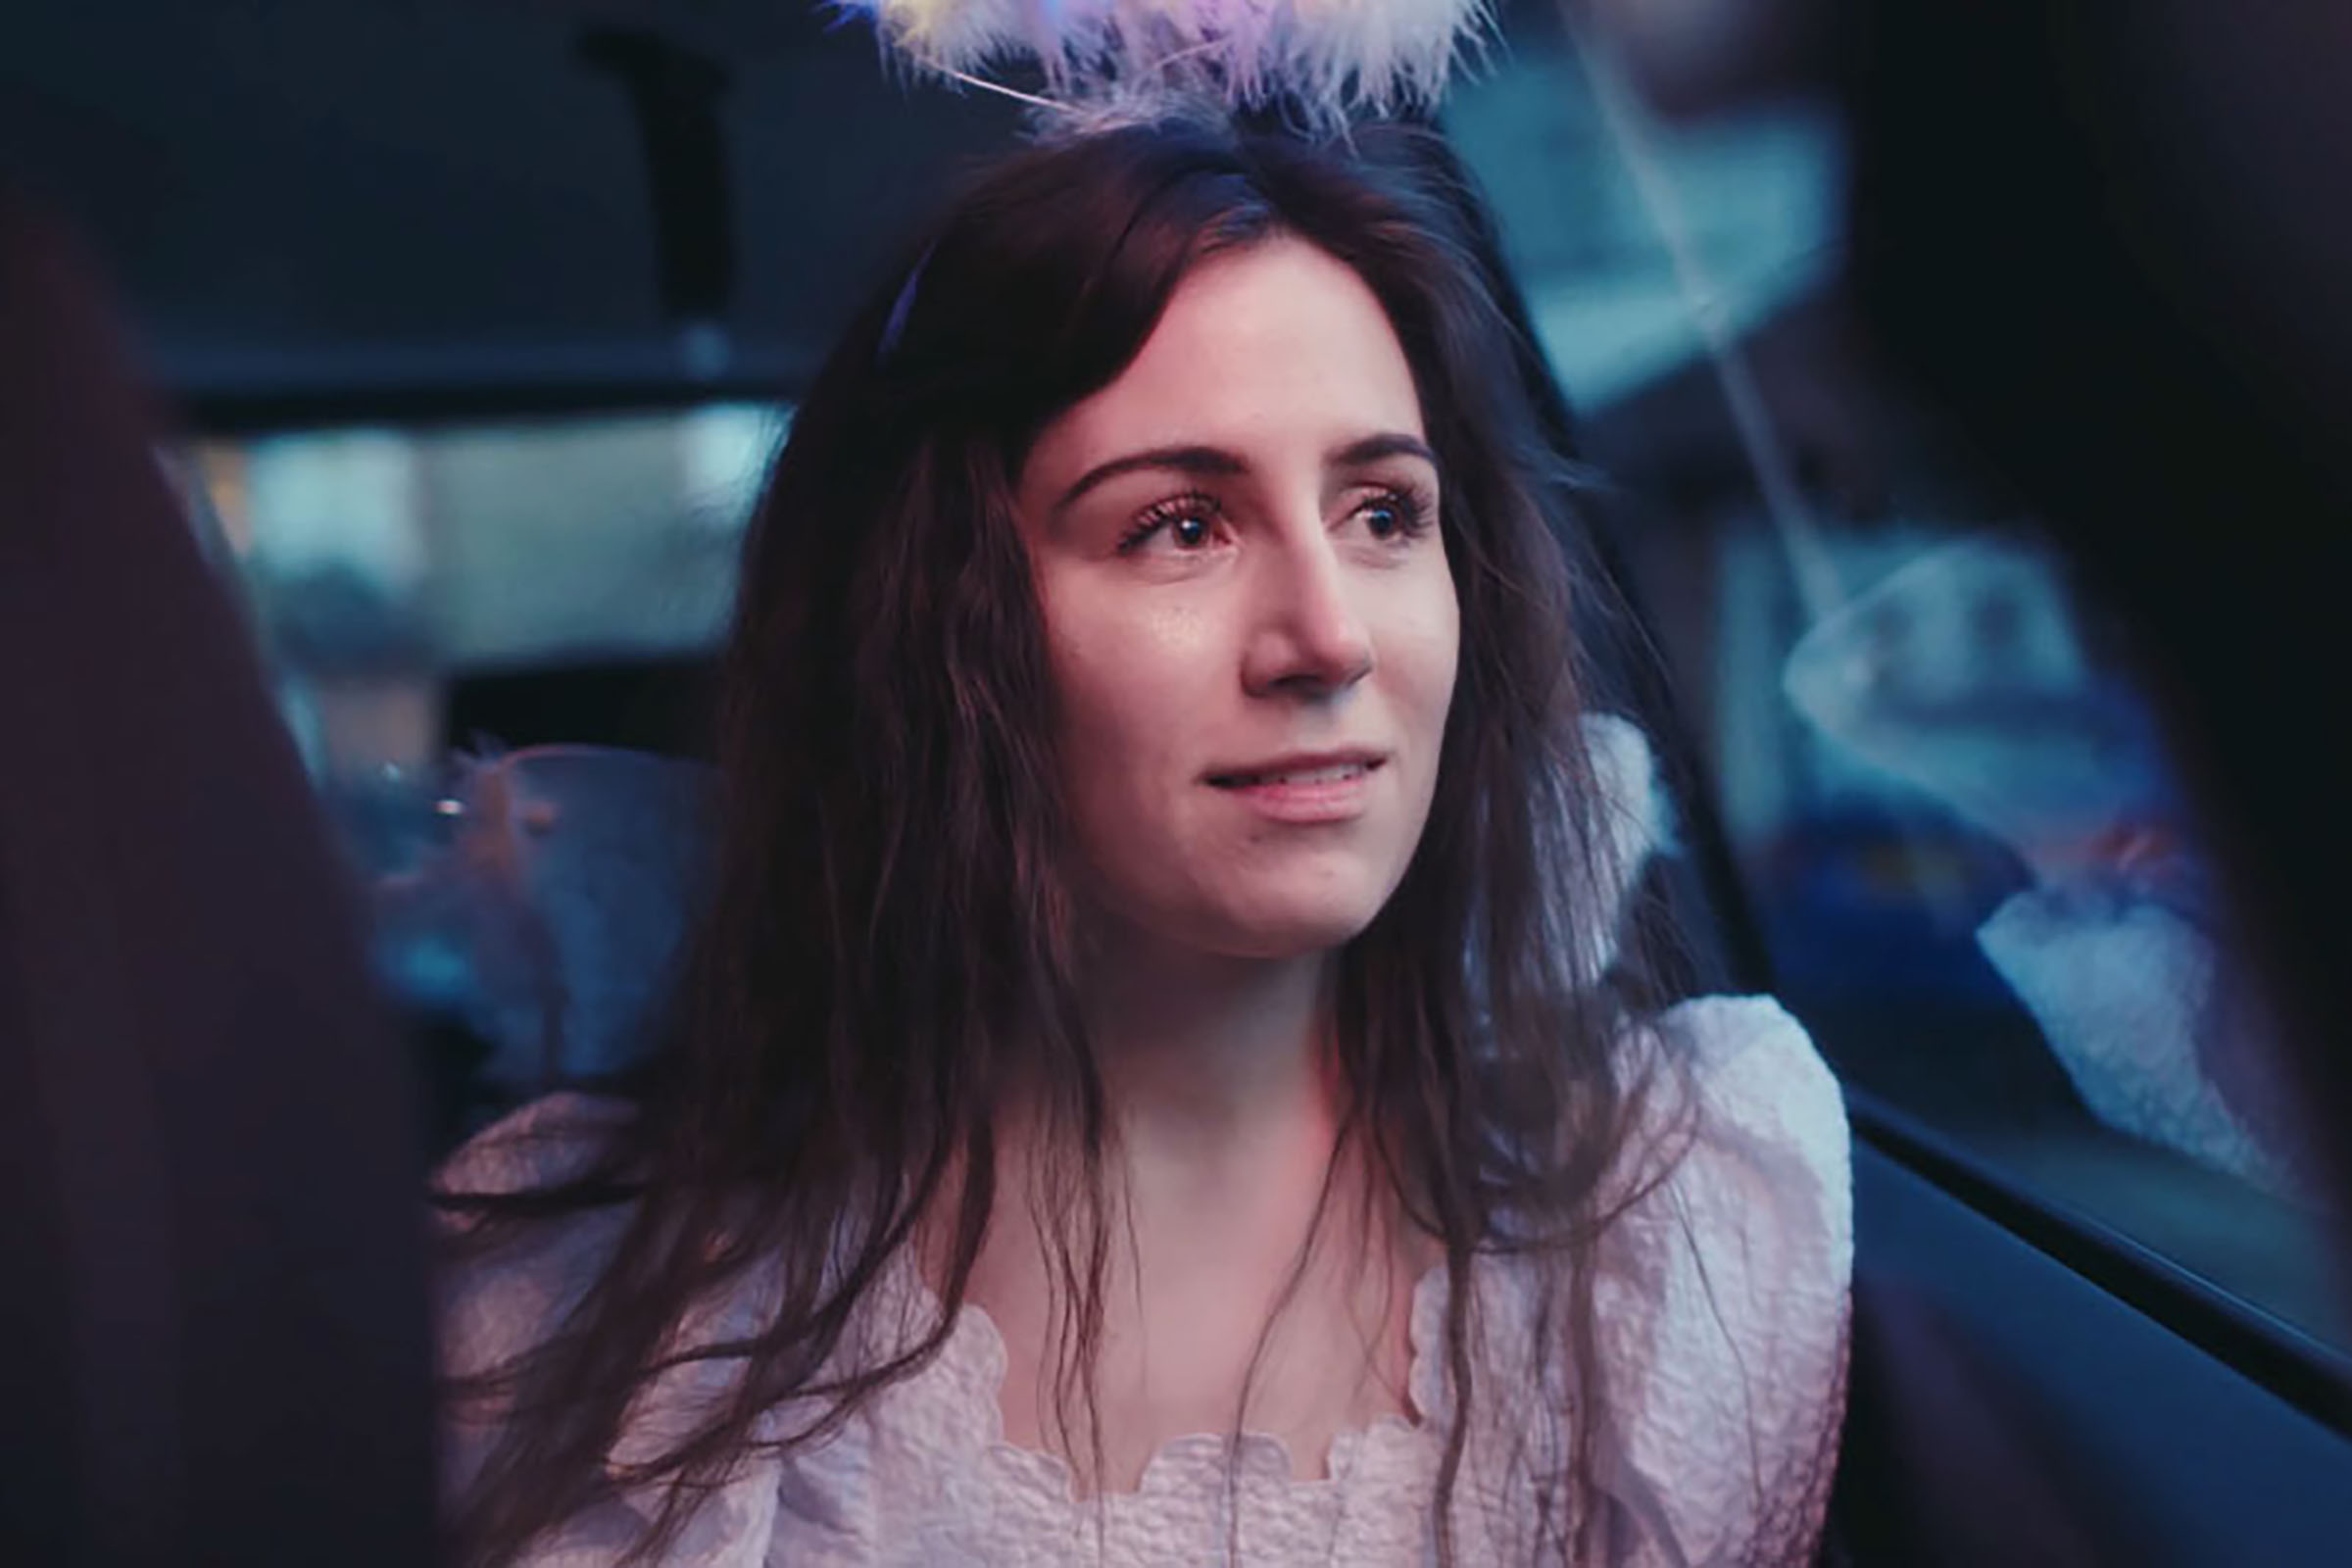 Dodie's 'Build a Problem' celebrates where she's been and where she's going